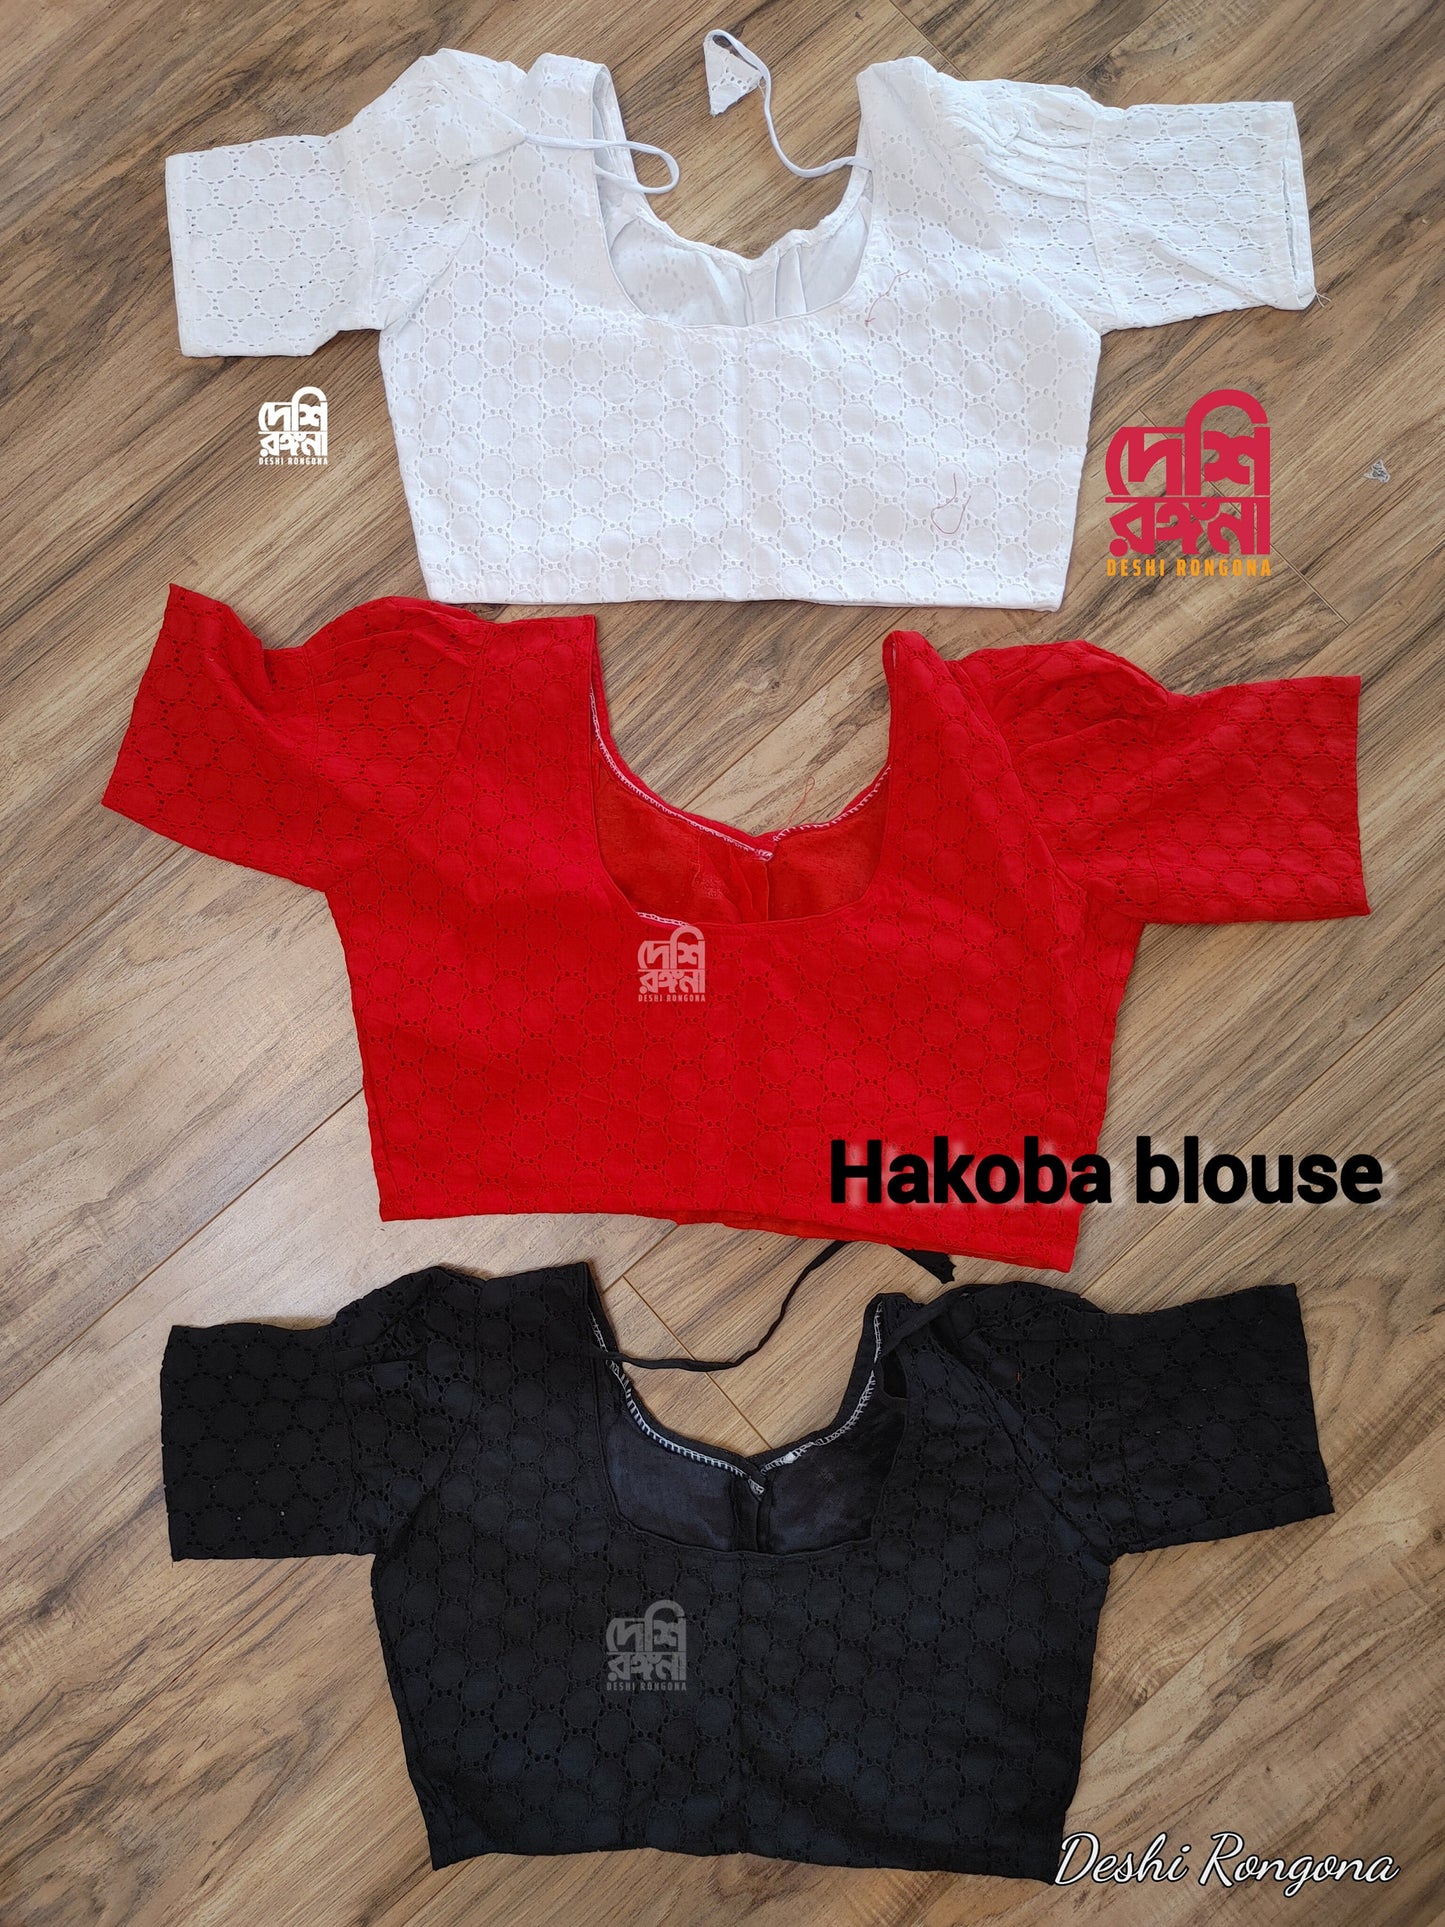 Hakoba Cotton Blouse, Size 34 to 42, Red, Black, White Colors, Comfortable, goes with any saree collection you have, no extra fabric inside